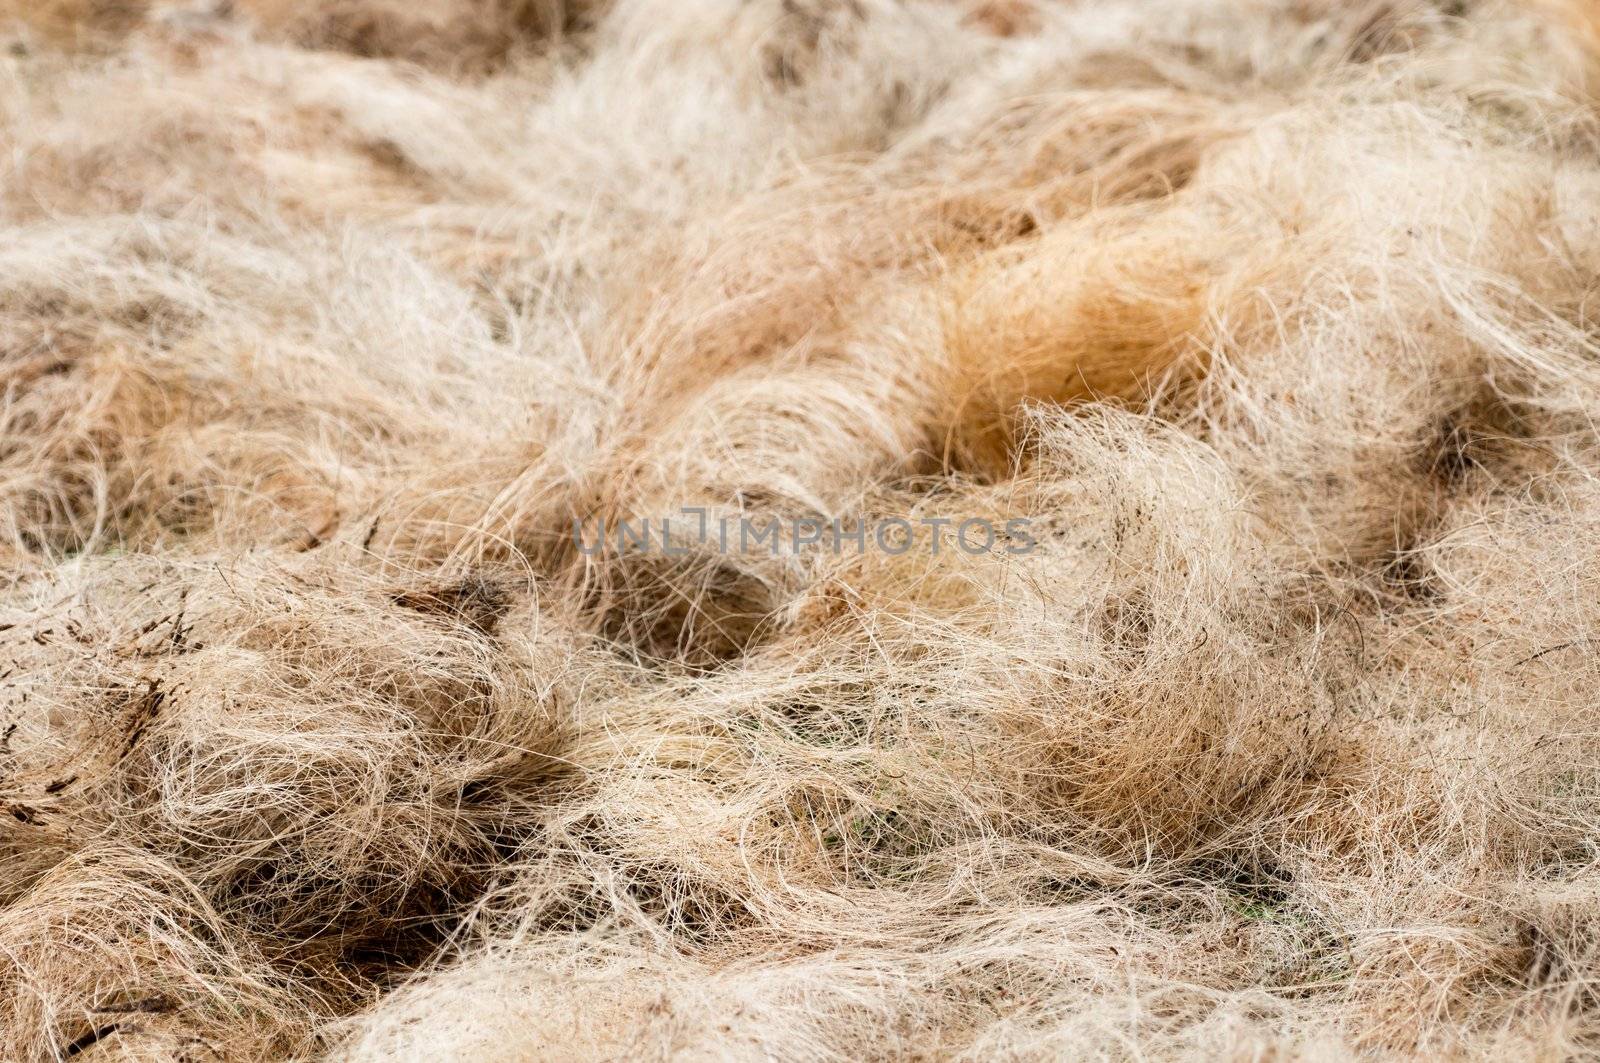 Pile of processed copra fibre get dried before next stage of cords production